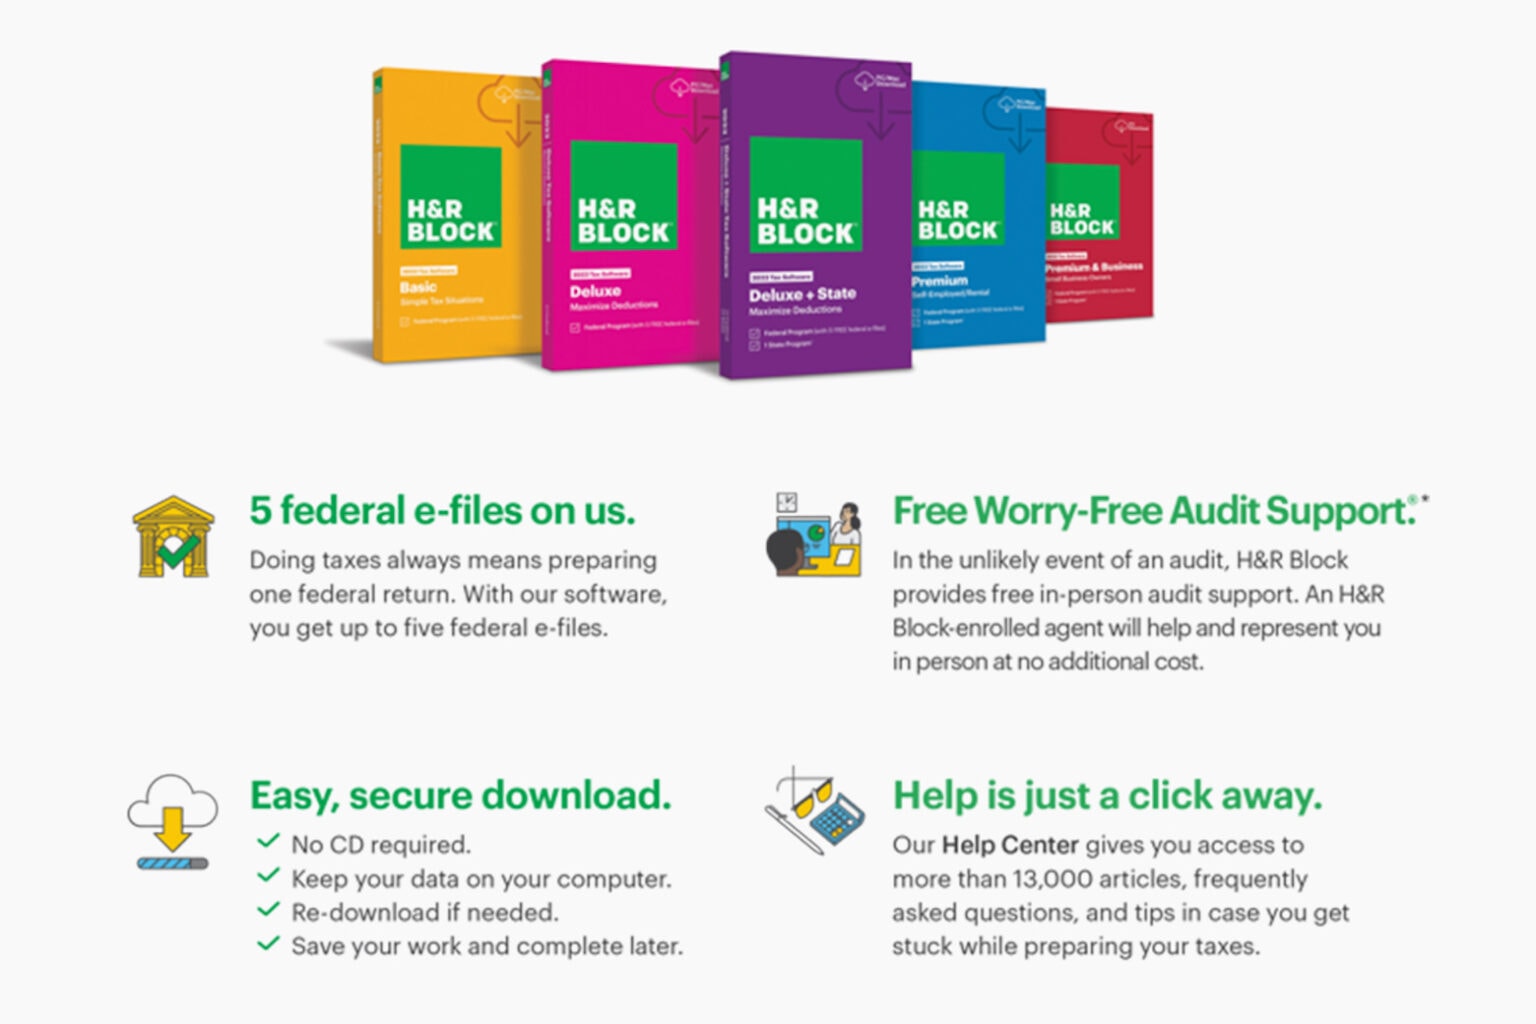 Breeze through tax season with this H&R Block bundle for only $29.99.